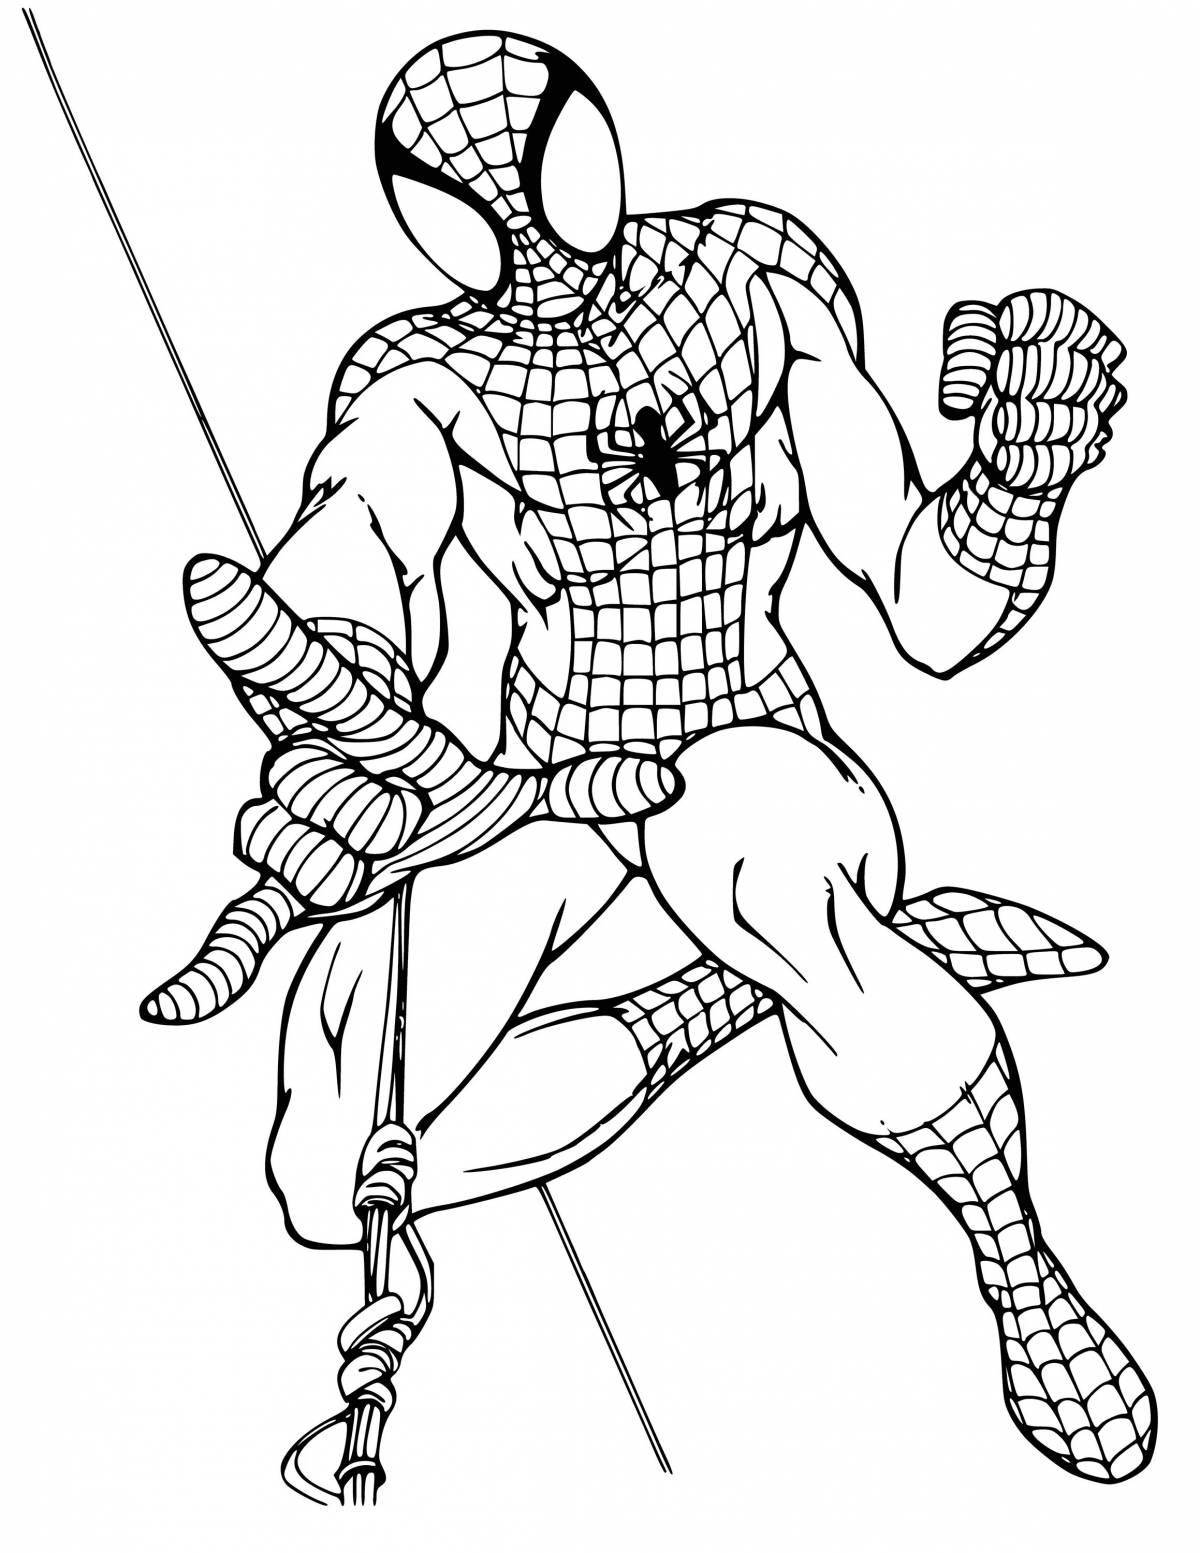 Spider-man relaxing anti-stress coloring book